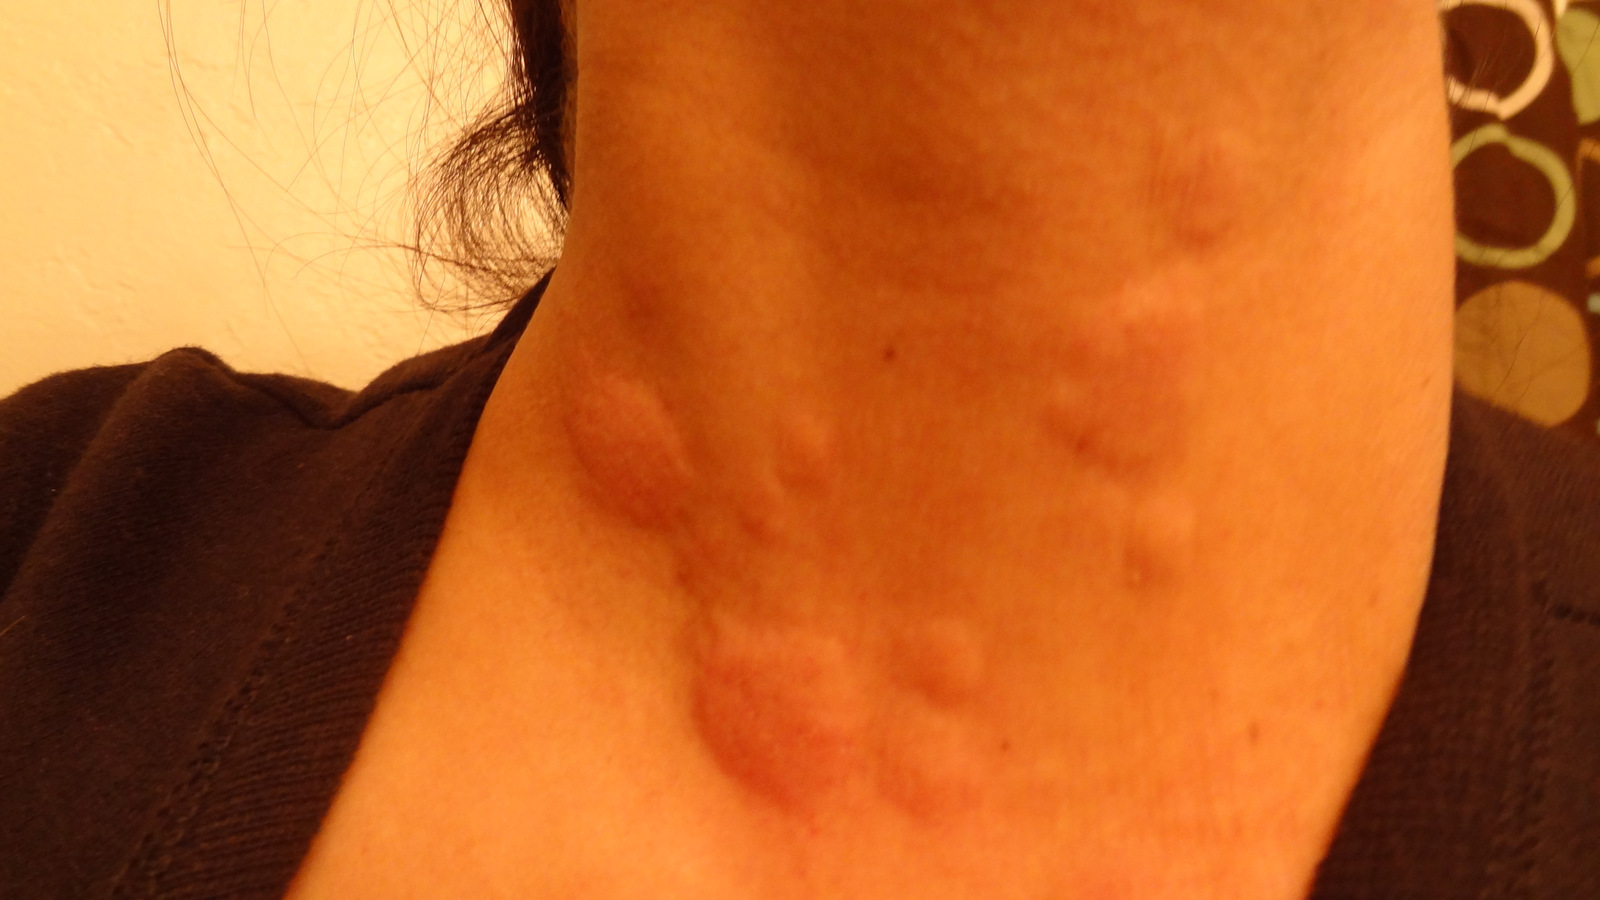 Skin hives can also be caused by a contact dermatitis